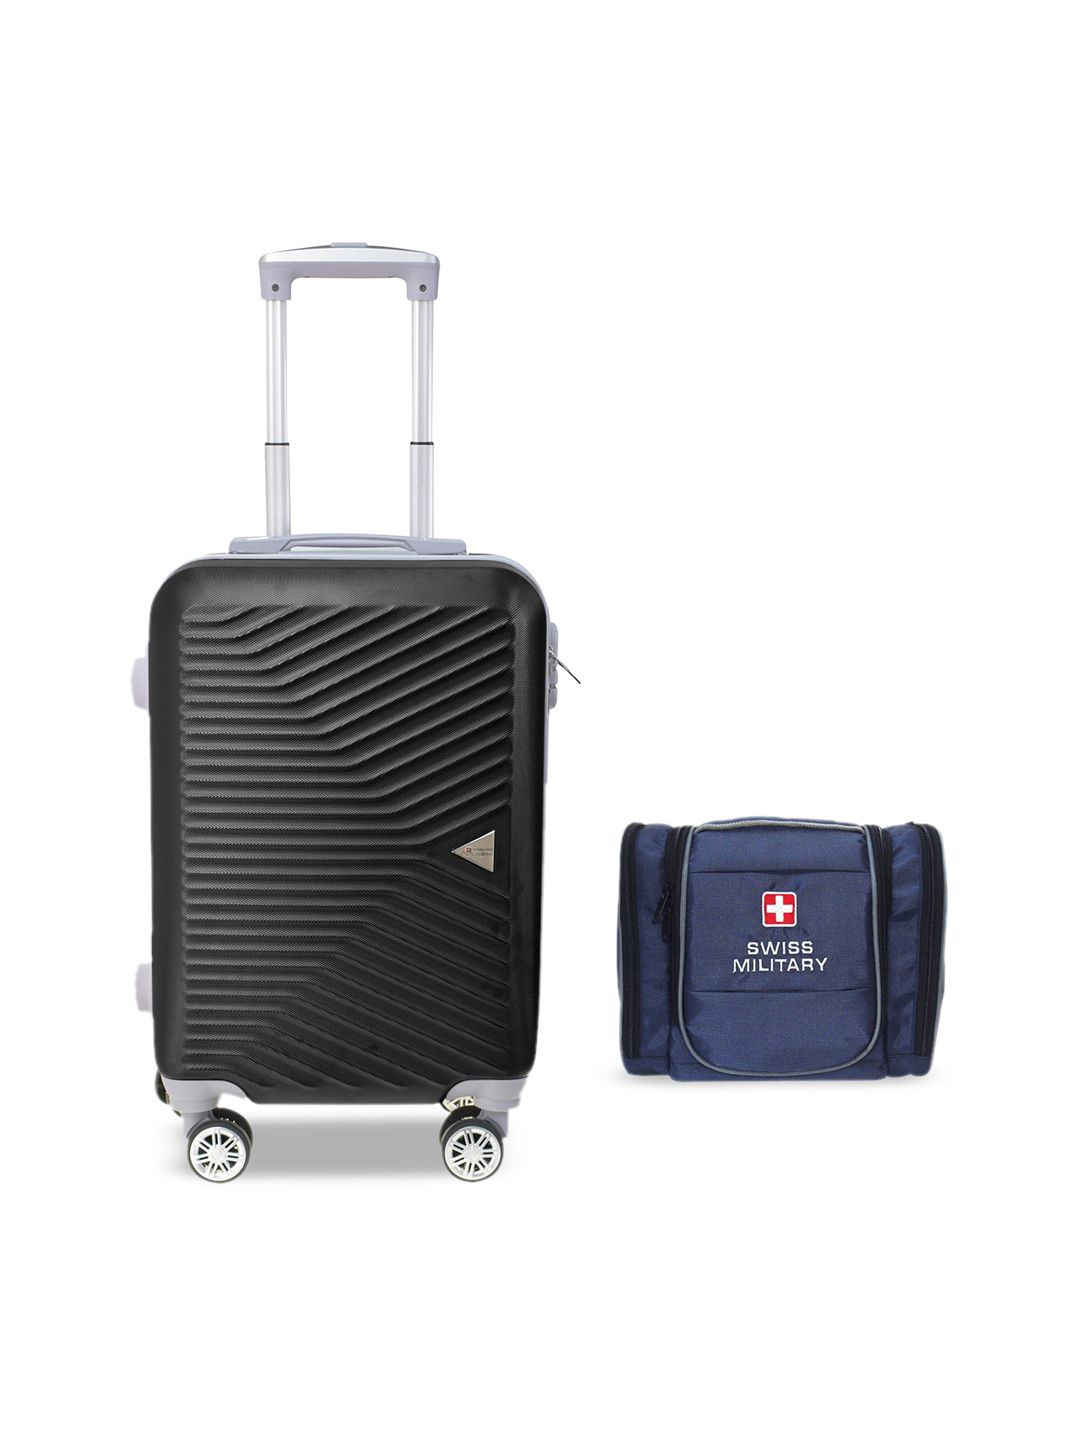 SWISS MILITARY Black & Blue Polycarbonate Trolley Suitcase Price in India